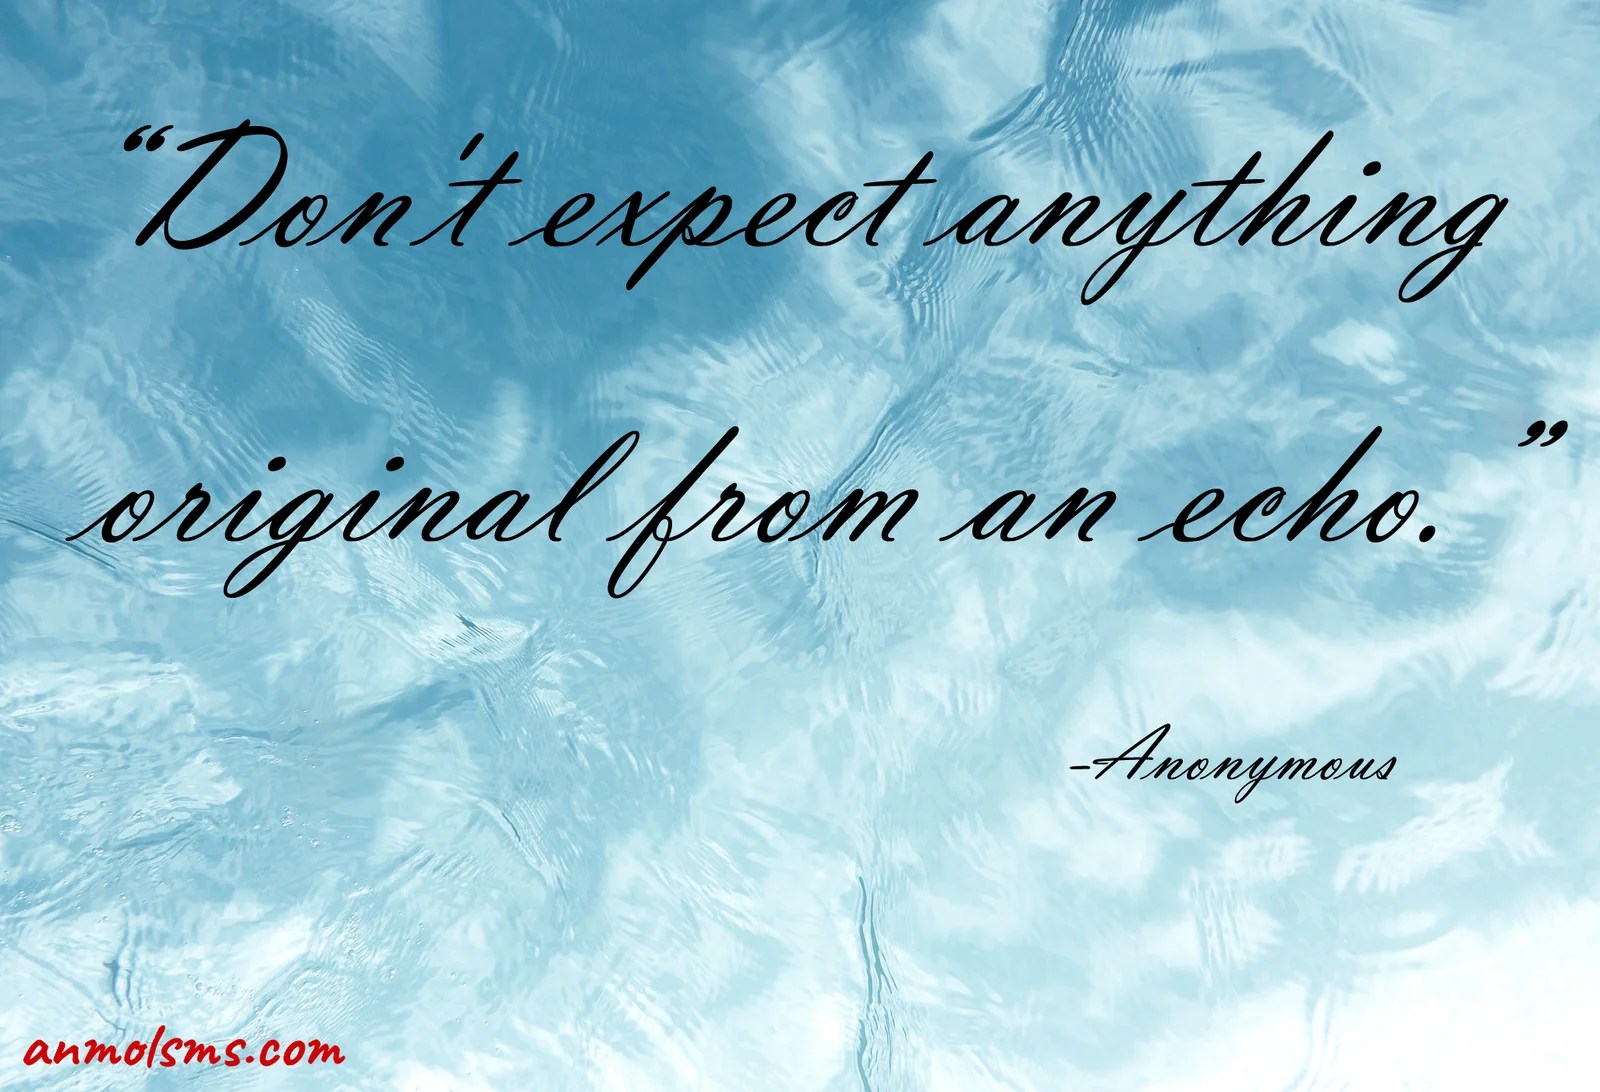 Don't expect anything original from an echo.‐ Anonymous